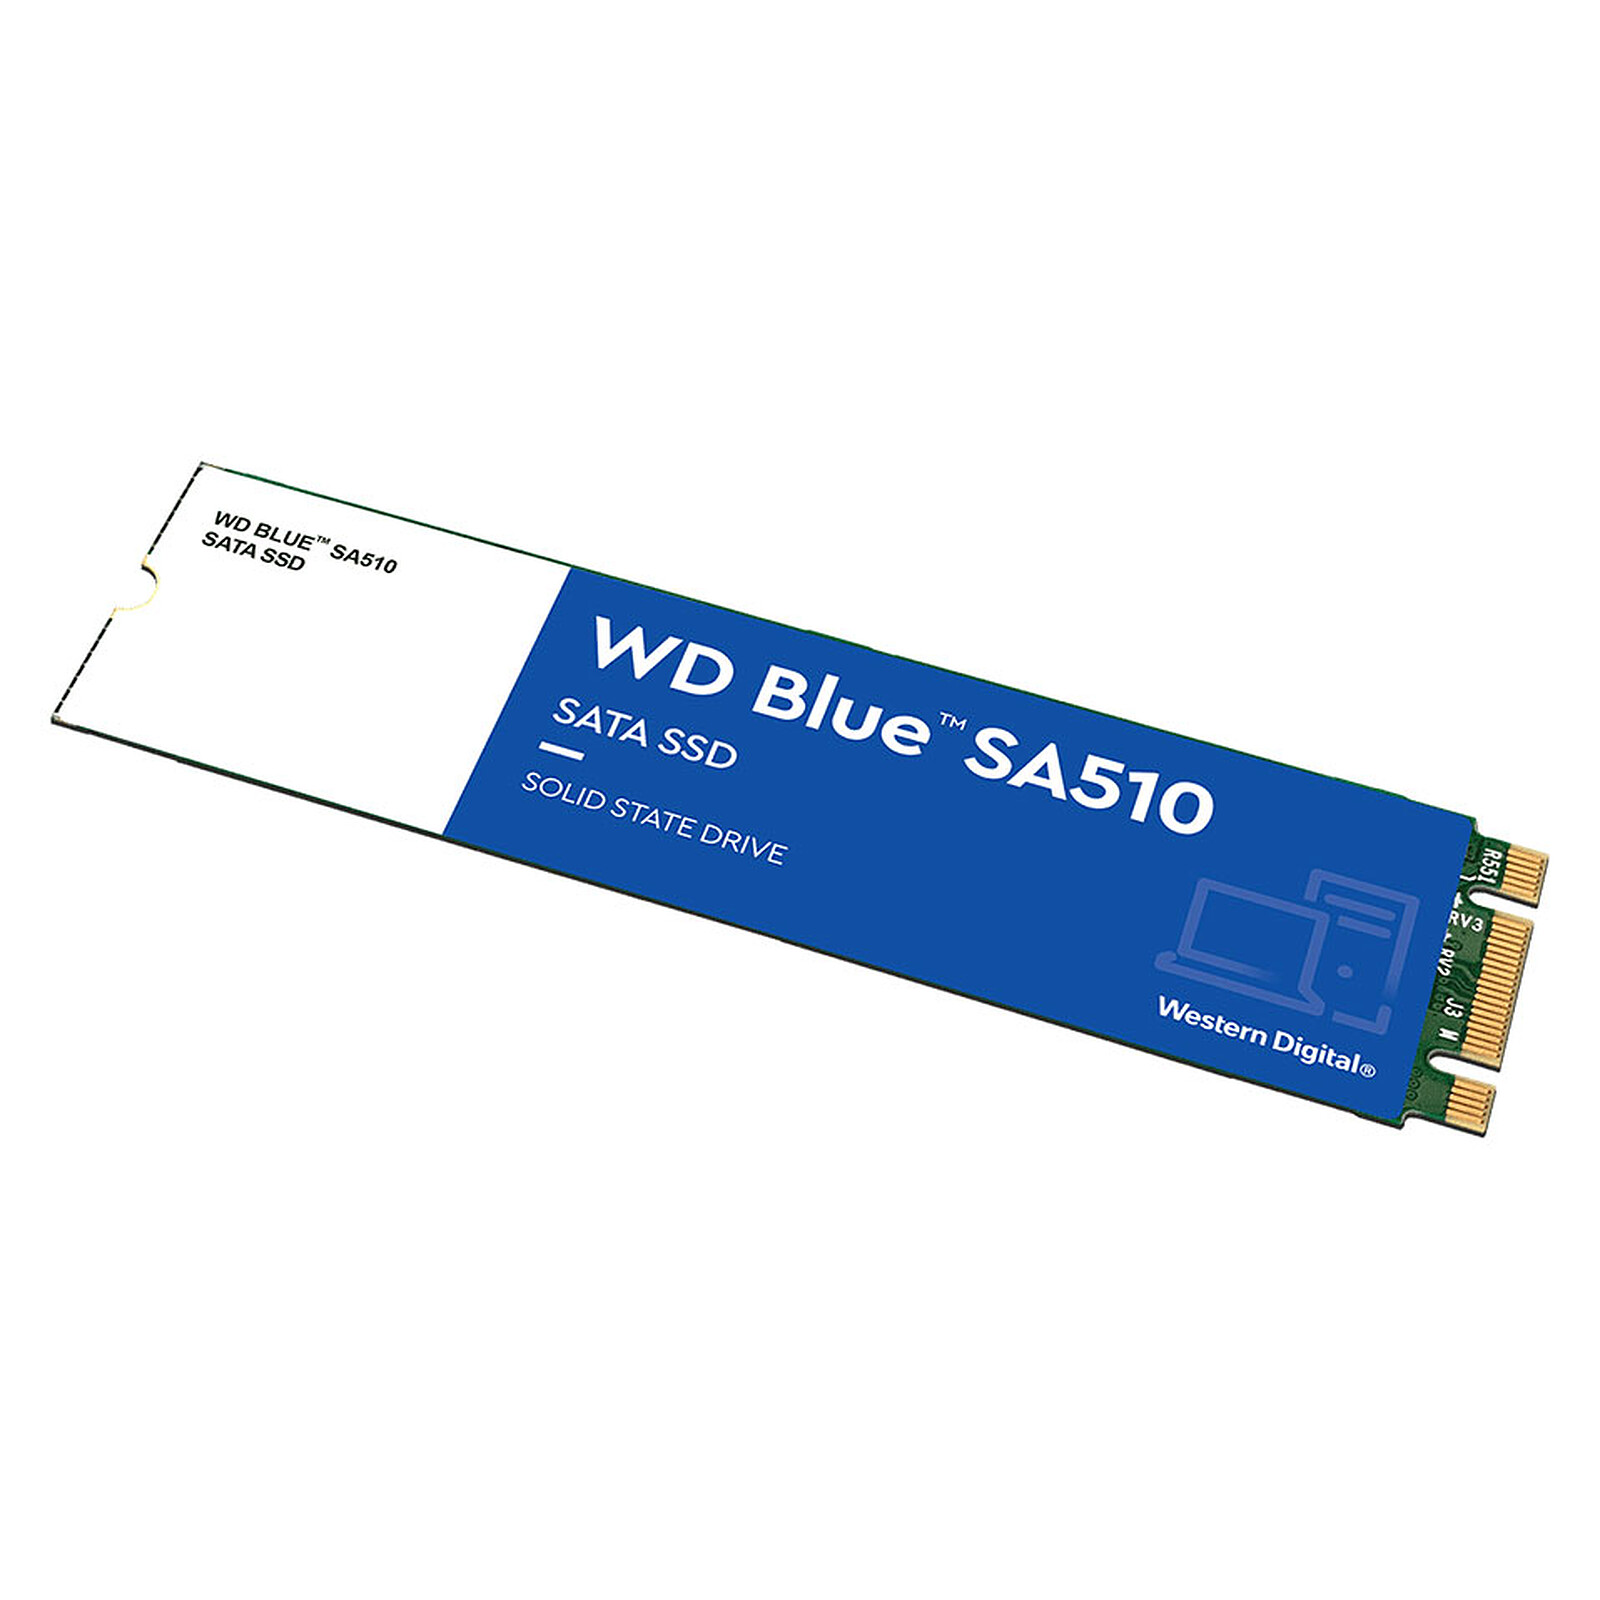 Western Digital SSD WD Blue SA510 1 To - M.2 - Disque SSD - LDLC